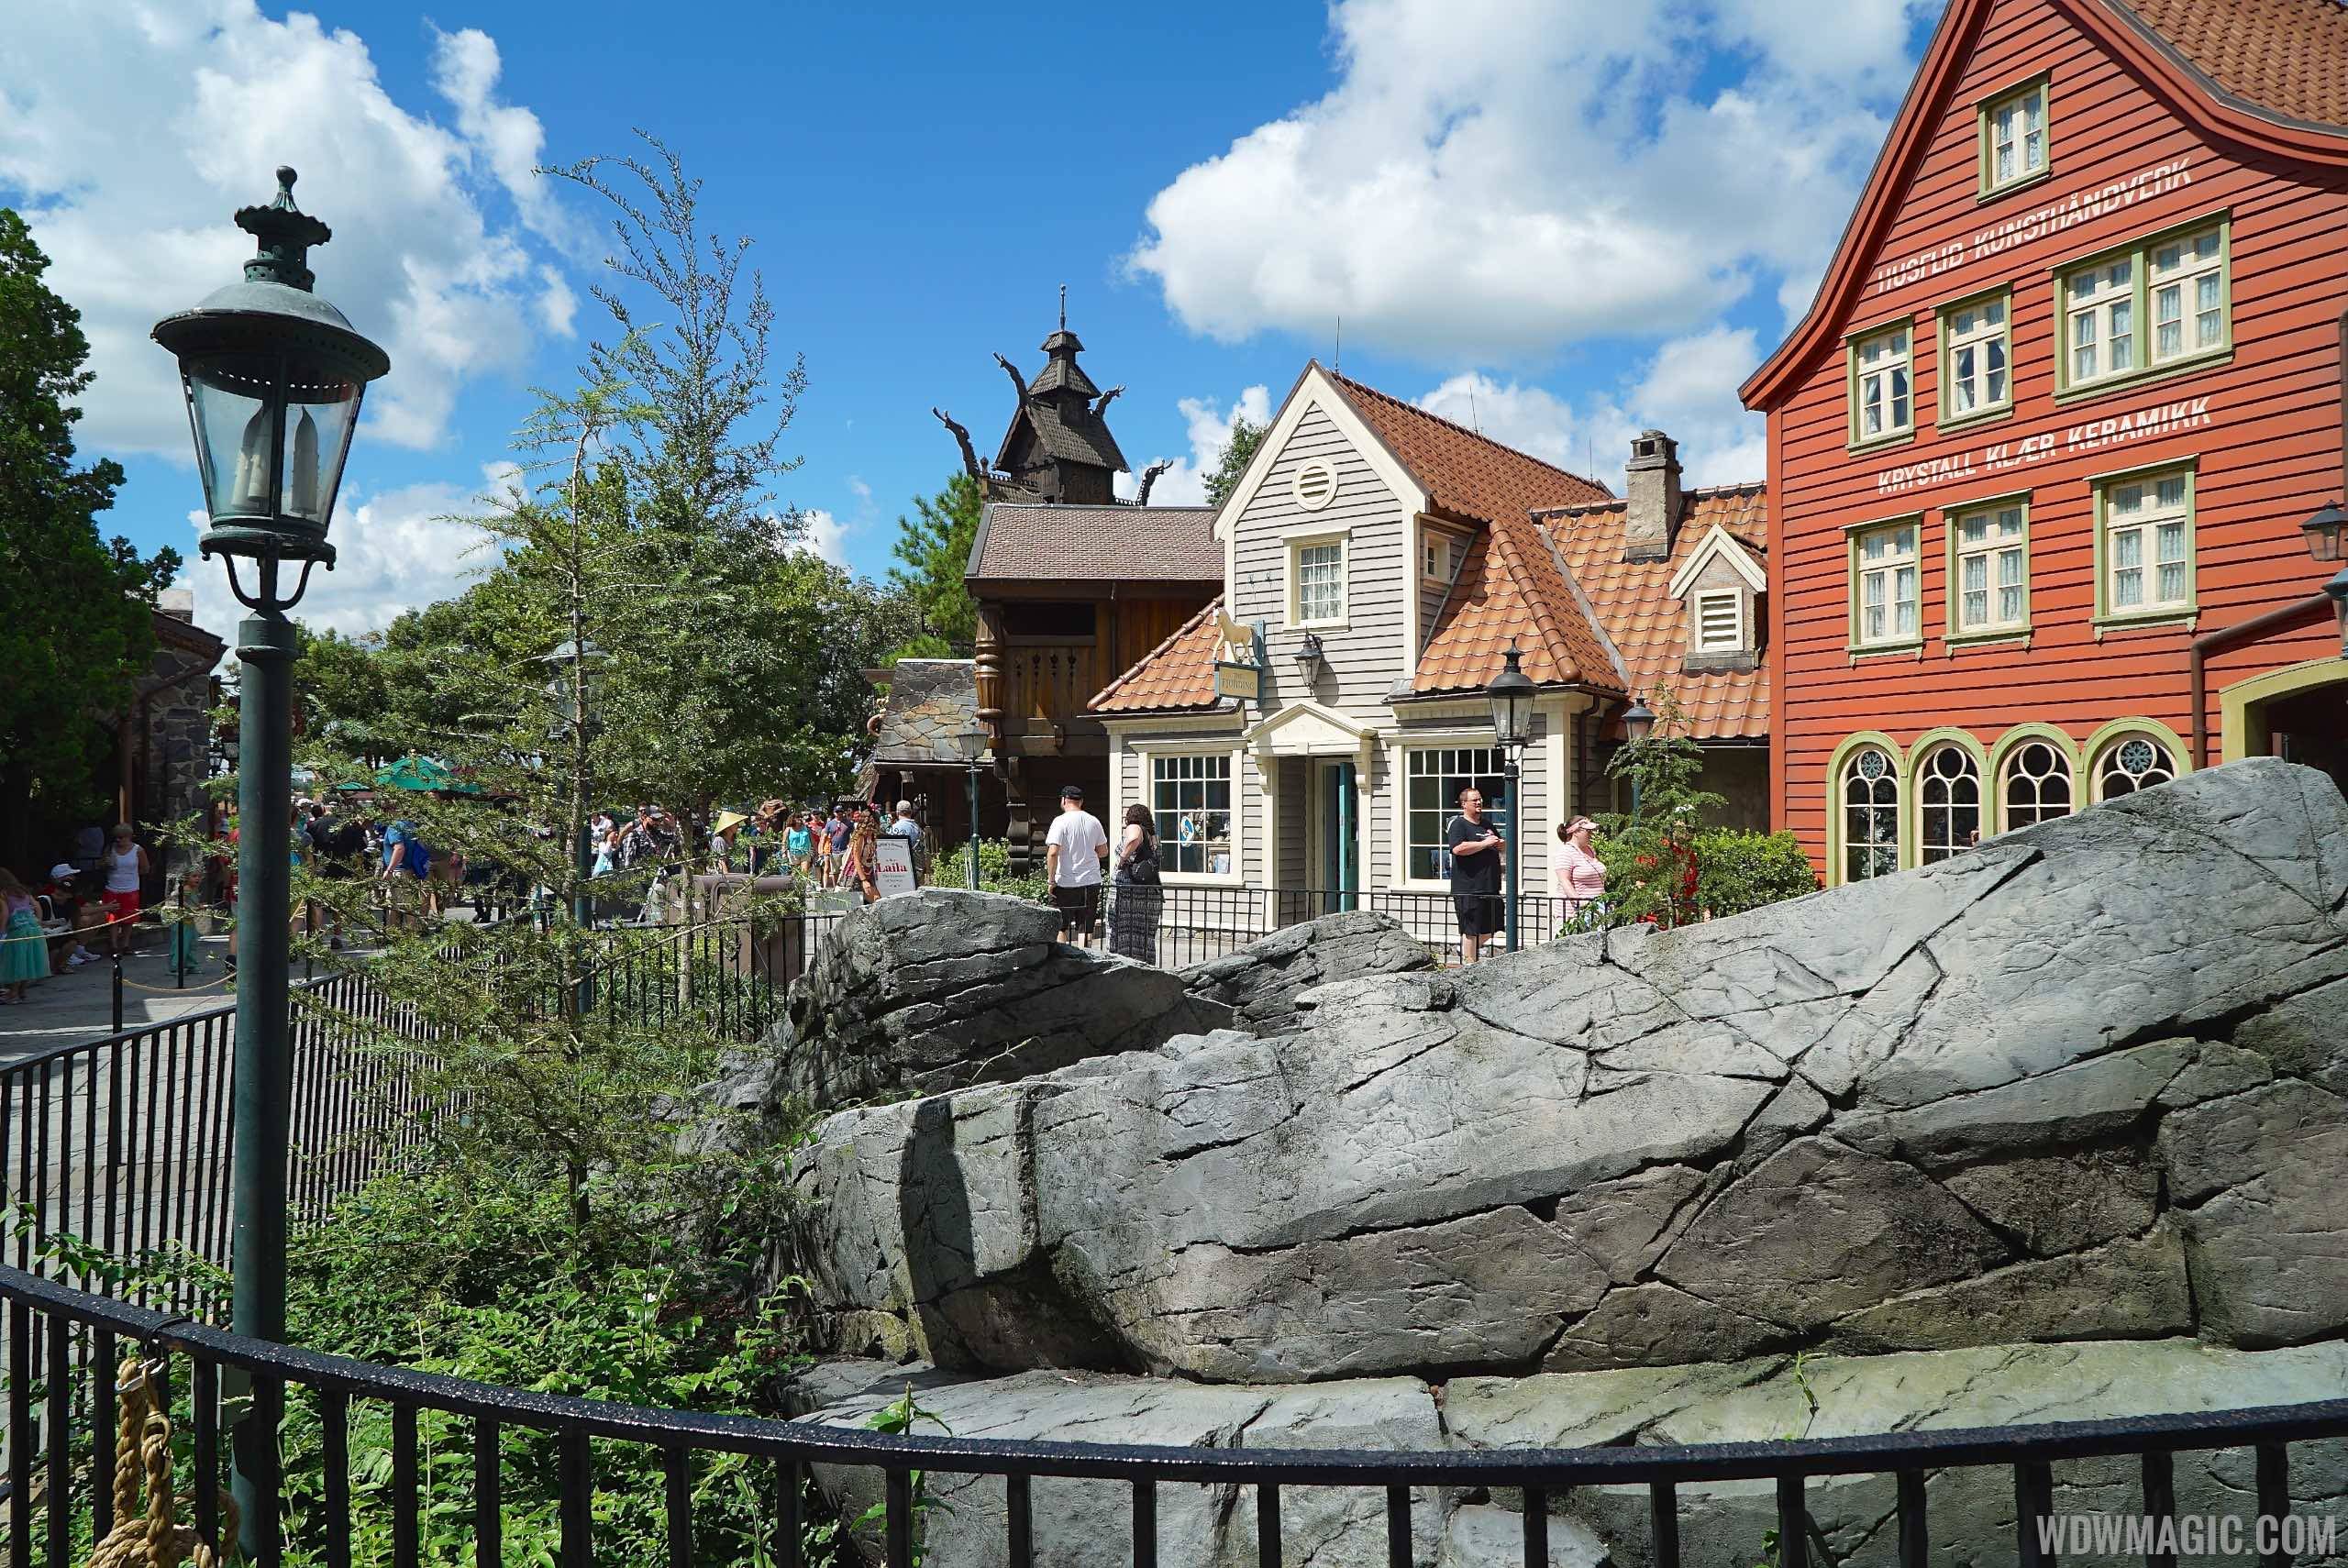 Norway Pavilion's Stave Church closing for refurbishment amid hints of Frozen ride opening date